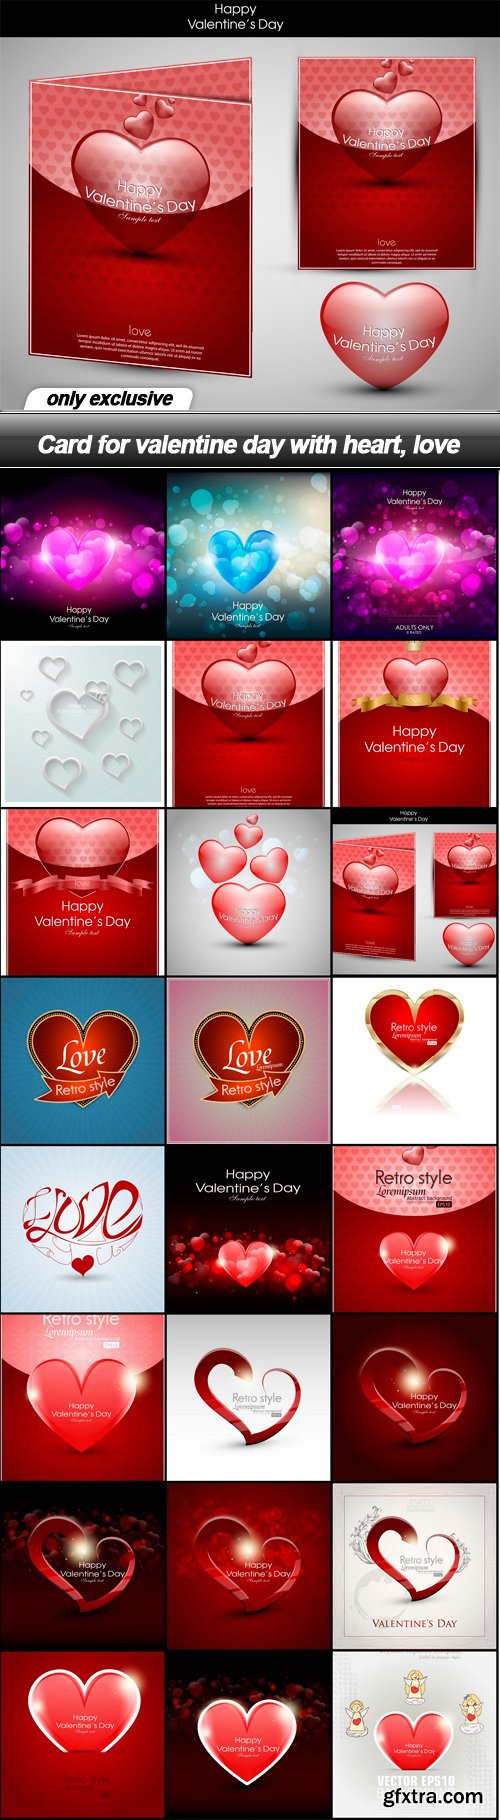 Card for valentine day with heart, love - 24 EPS